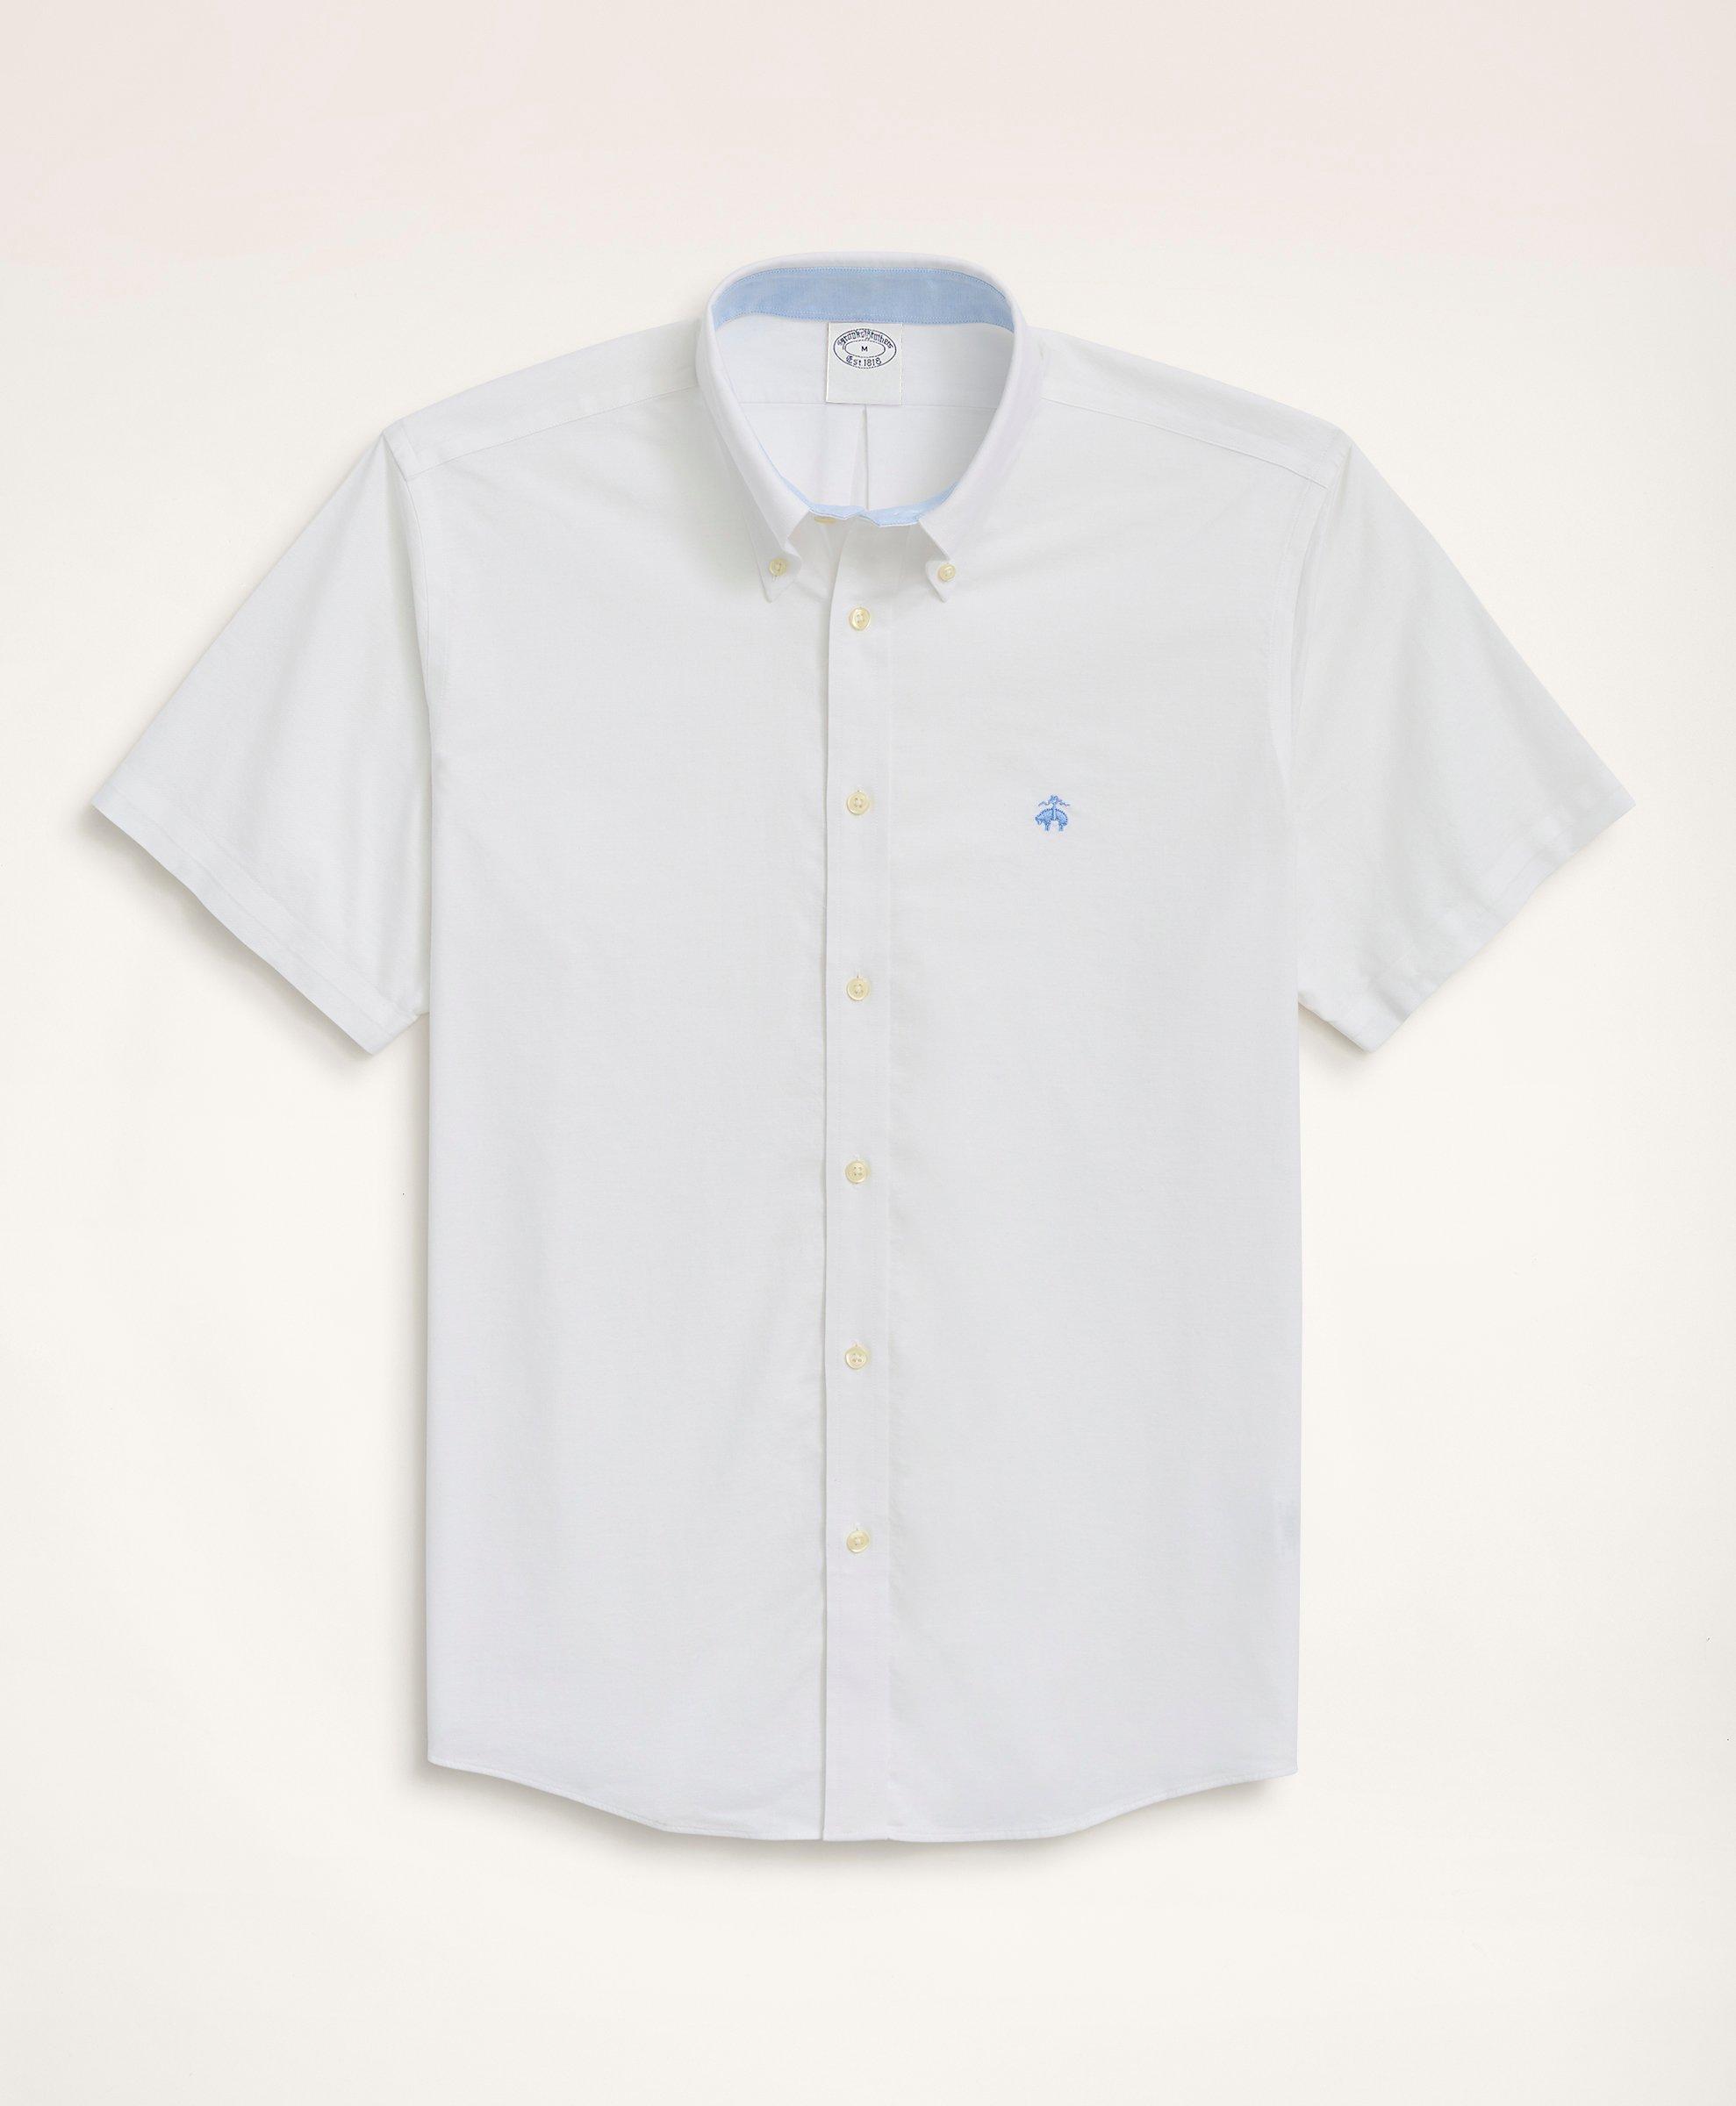 Brooks Brothers Stretch Regent Regular-fit Sport Shirt, Non-iron Short-sleeve Oxford | White | Size Xs